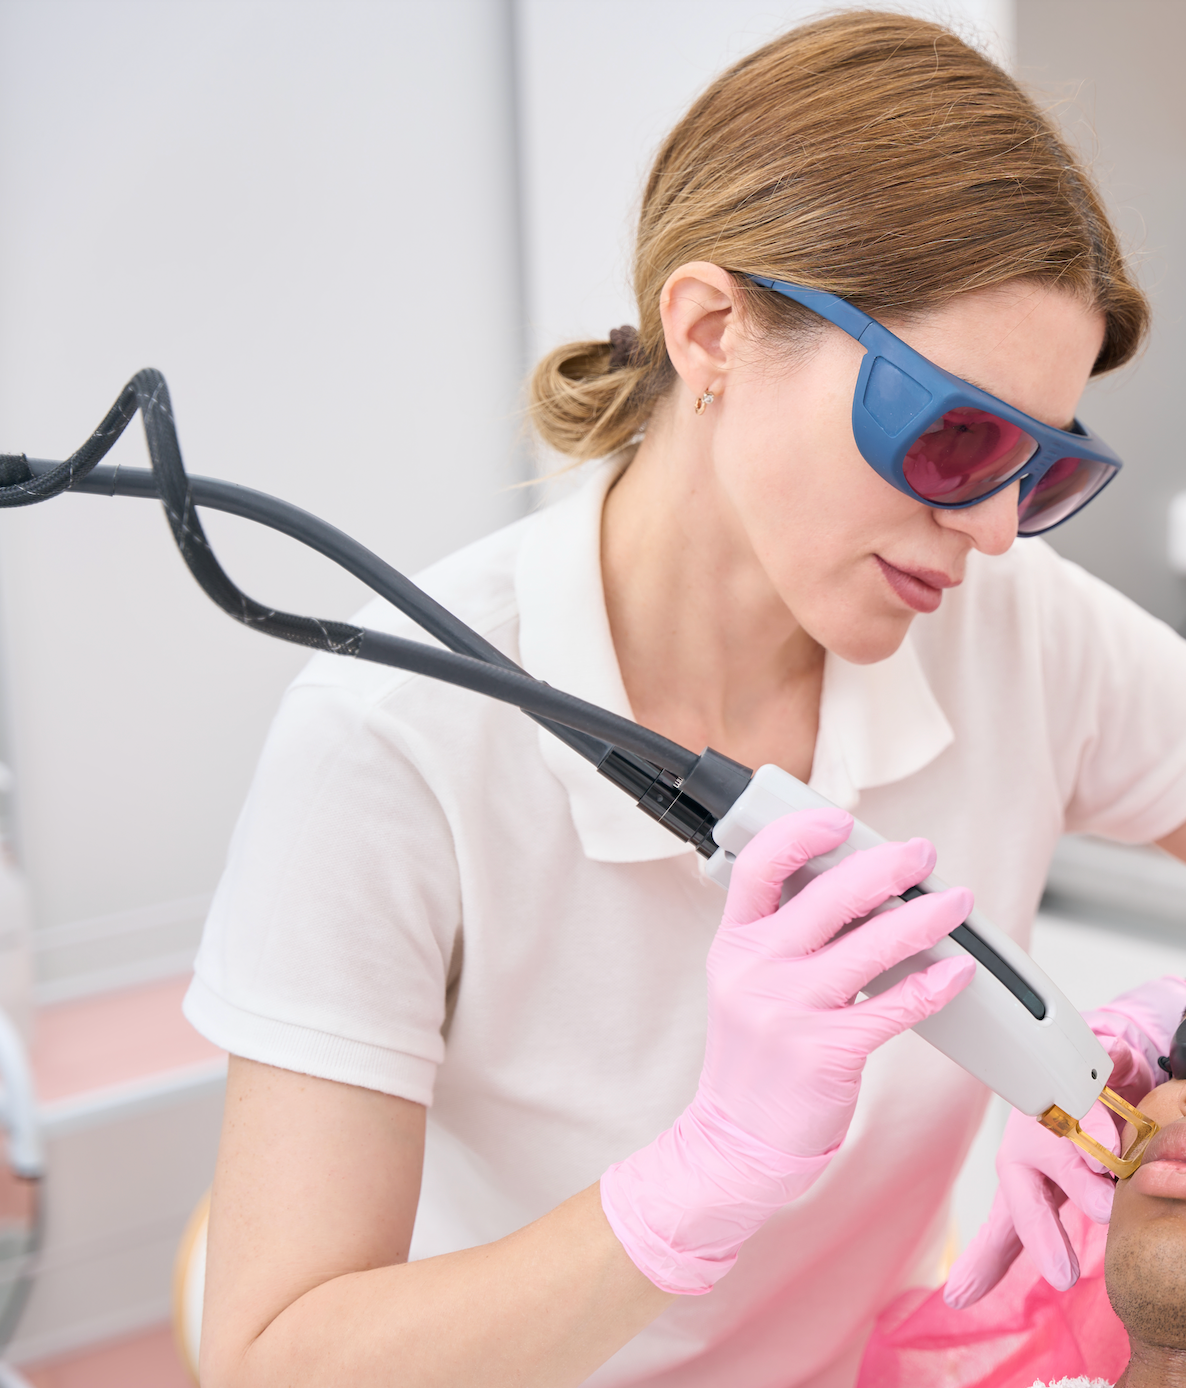 The Critical Role of Compliance in Australia's Laser Practice